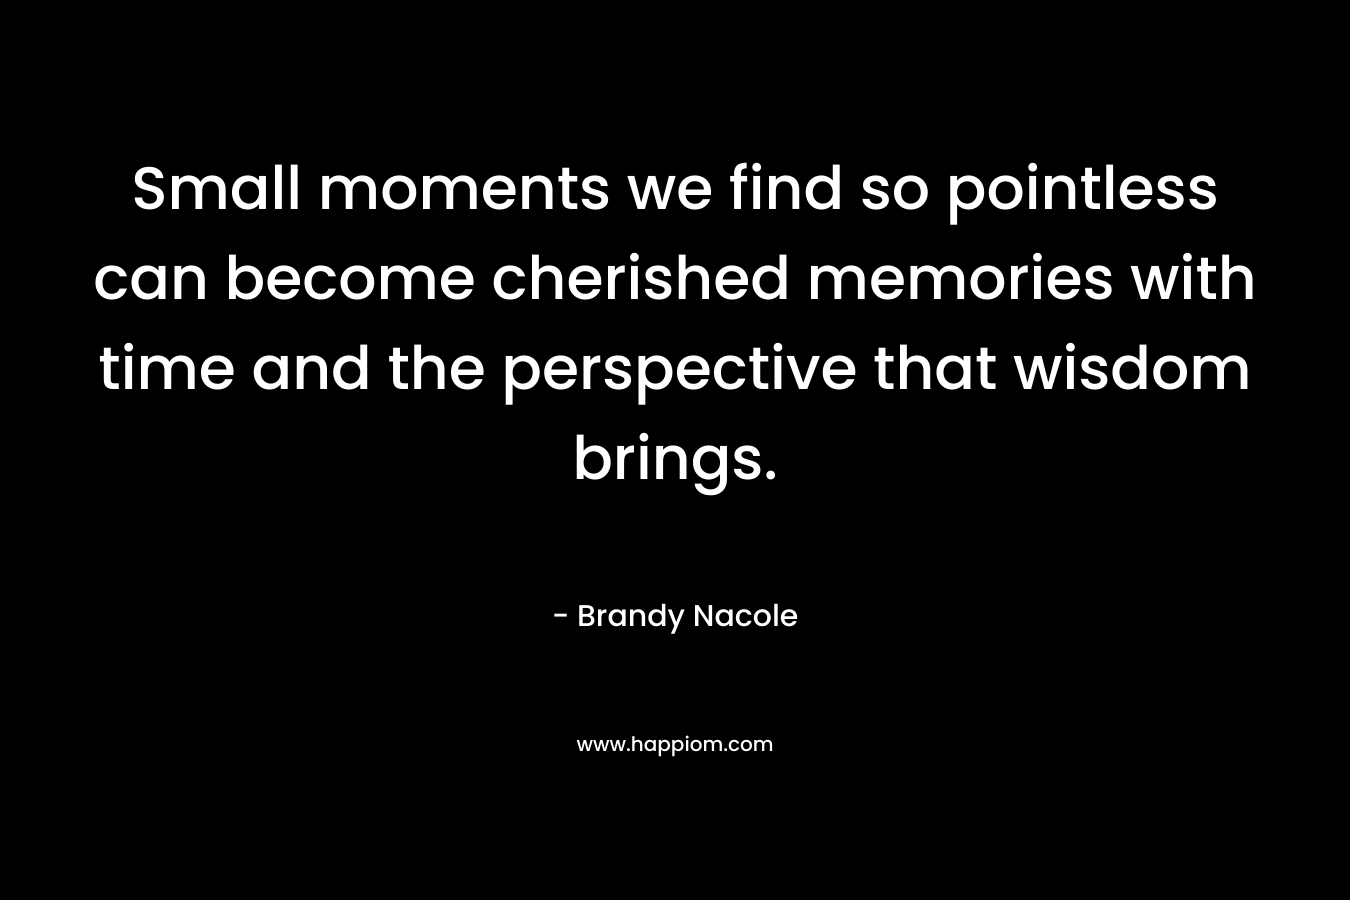 Small moments we find so pointless can become cherished memories with time and the perspective that wisdom brings. – Brandy Nacole